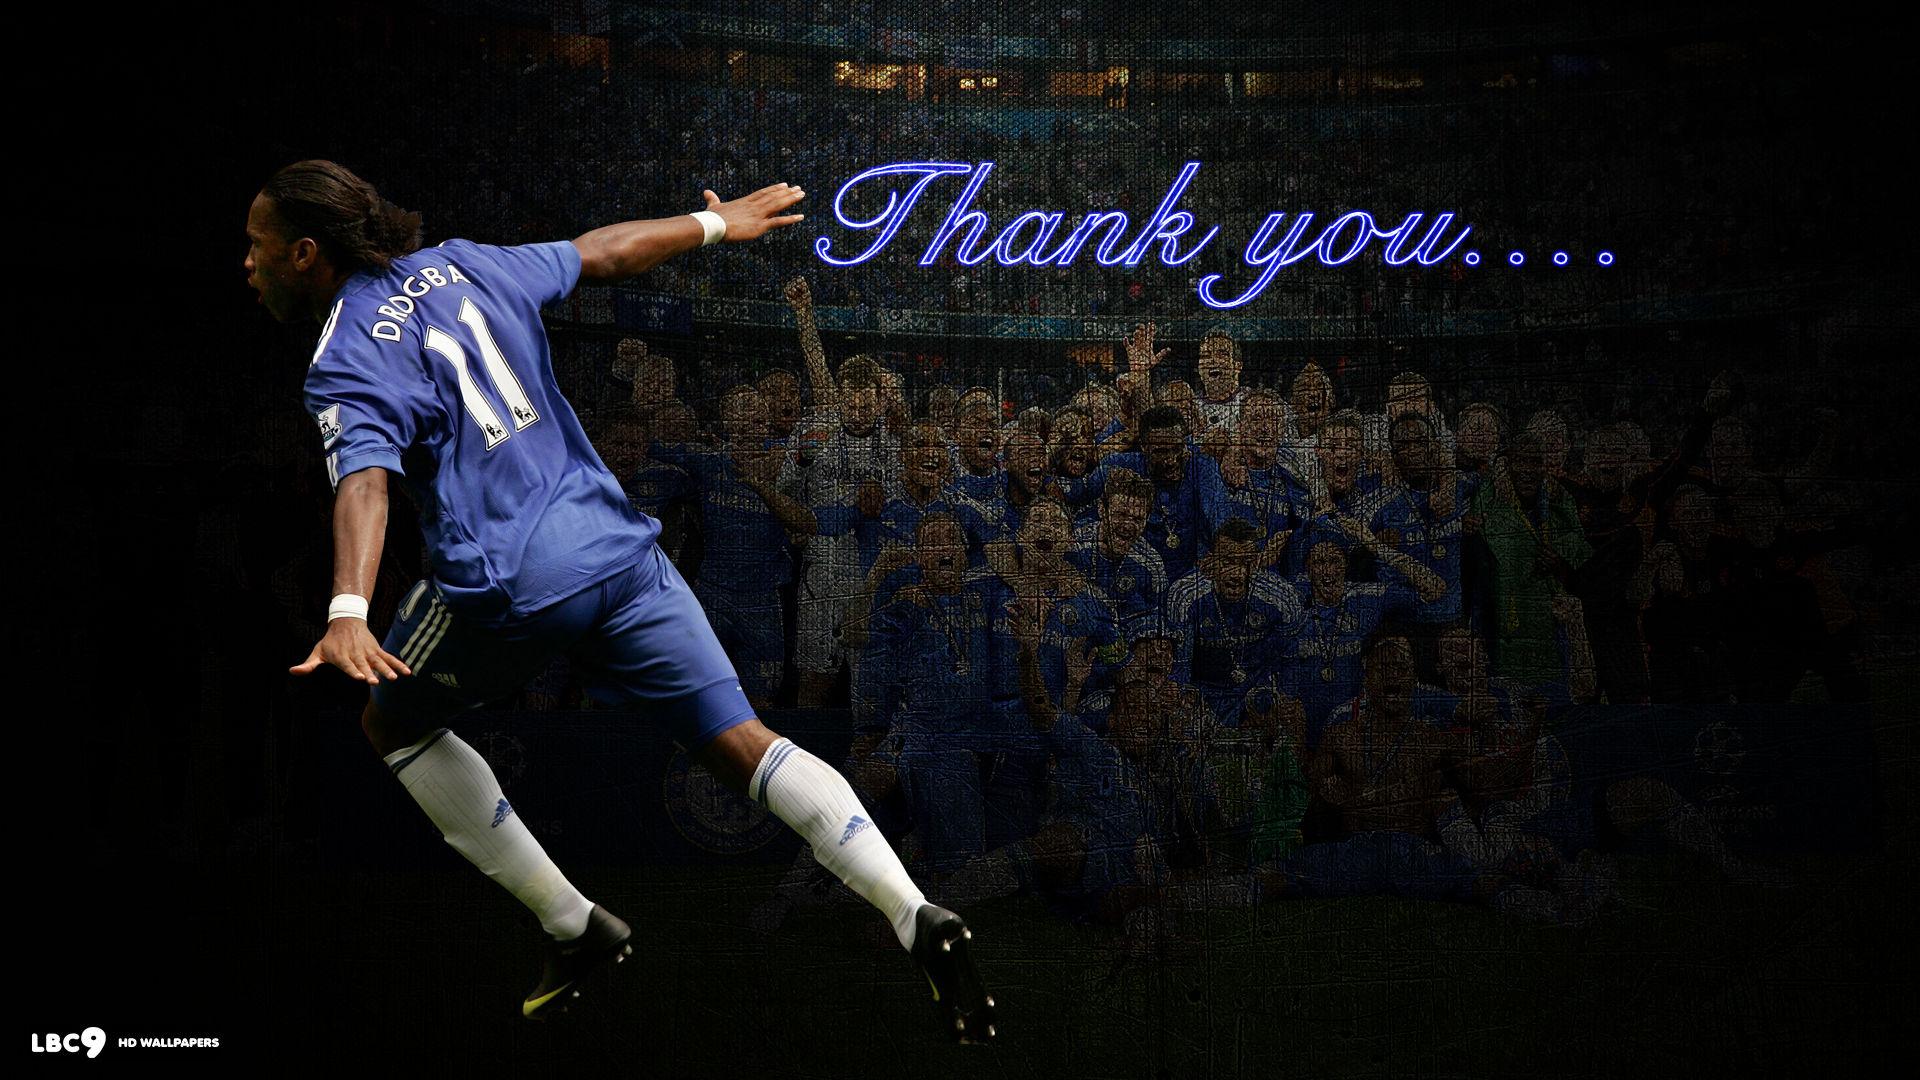 Wallpaper Blink of Didier Drogba Wallpaper HD for Android